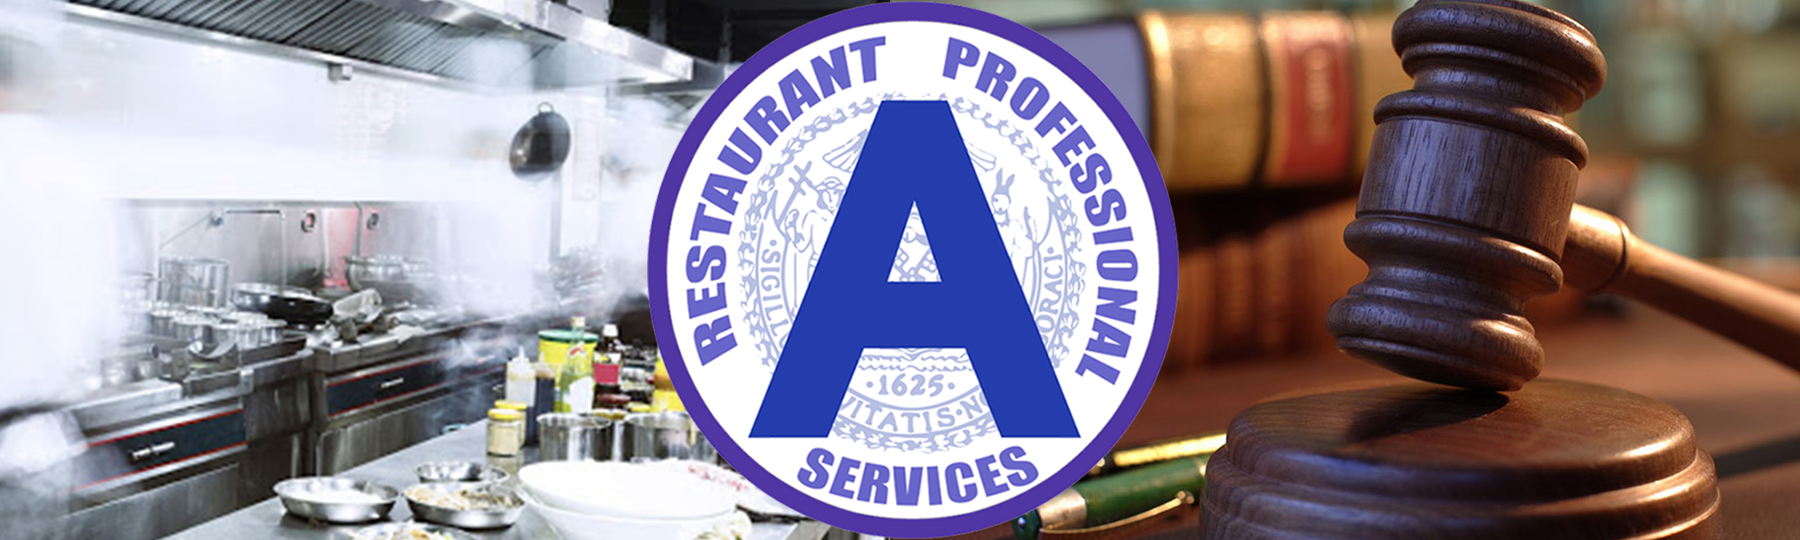 Restaurant Professional Services, LLC | Department of Health Legal Representation  in the Manhattan (NYC), Queens, Brooklyn, Staten Island, Bronx, Long Island, Westchester, Connecticut, & New Jersey Area | PHONE: Mark Manganiello 516-557-5447, PHONE: Patrick Shoureas 516-946-6747 or email RestaurantProfessionalServices@gmail.com - Photo